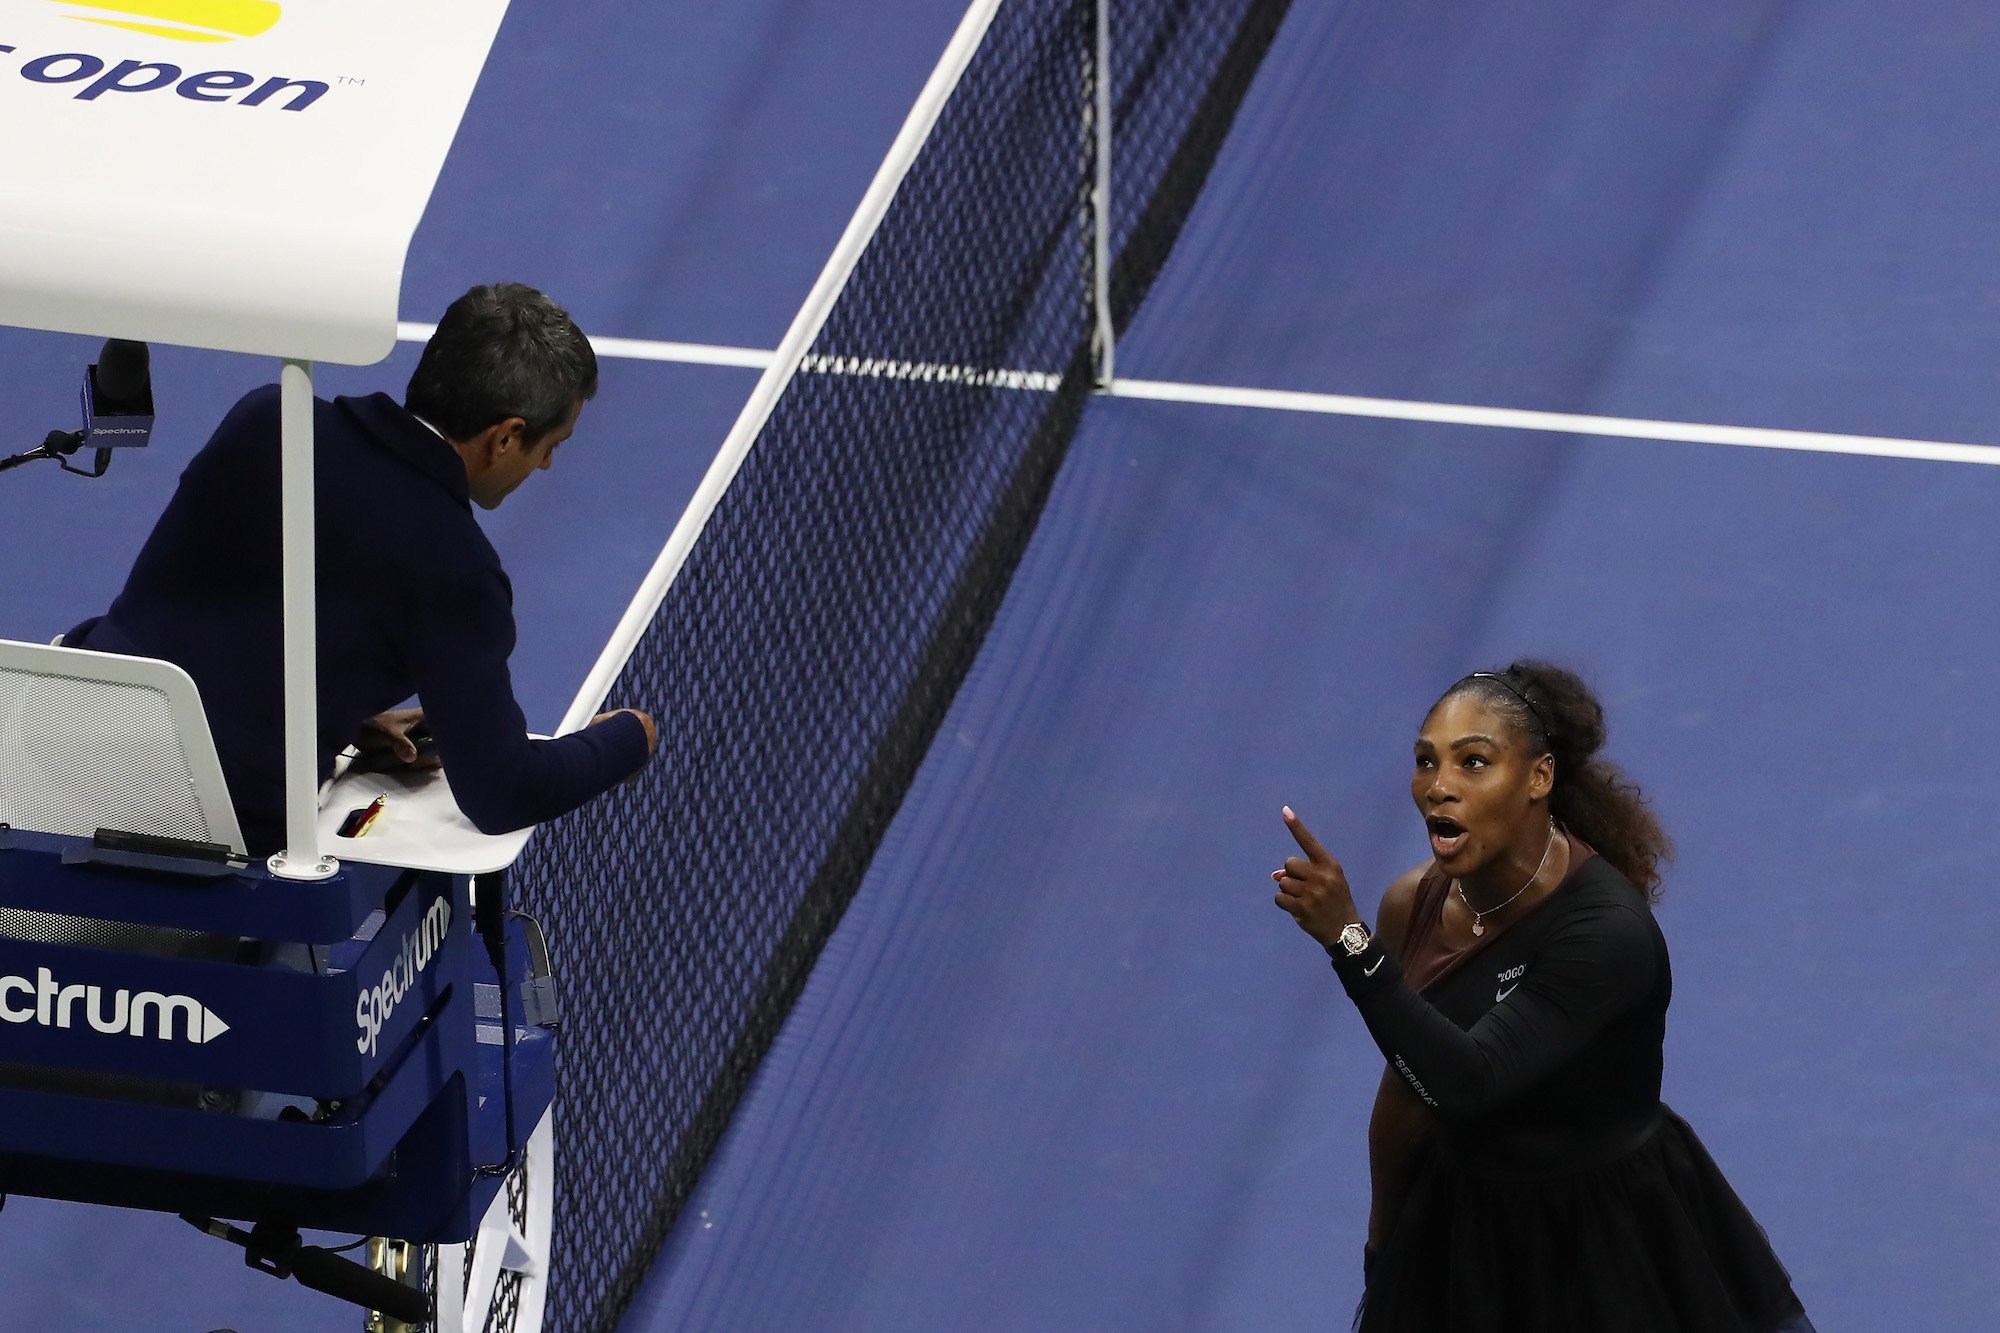 Serena Williams of the United States argues with umpire Carlos Ramos during her Women's Singles finals match against Naomi Osaka of Japan on Day Thirteen of the 2018 US Open